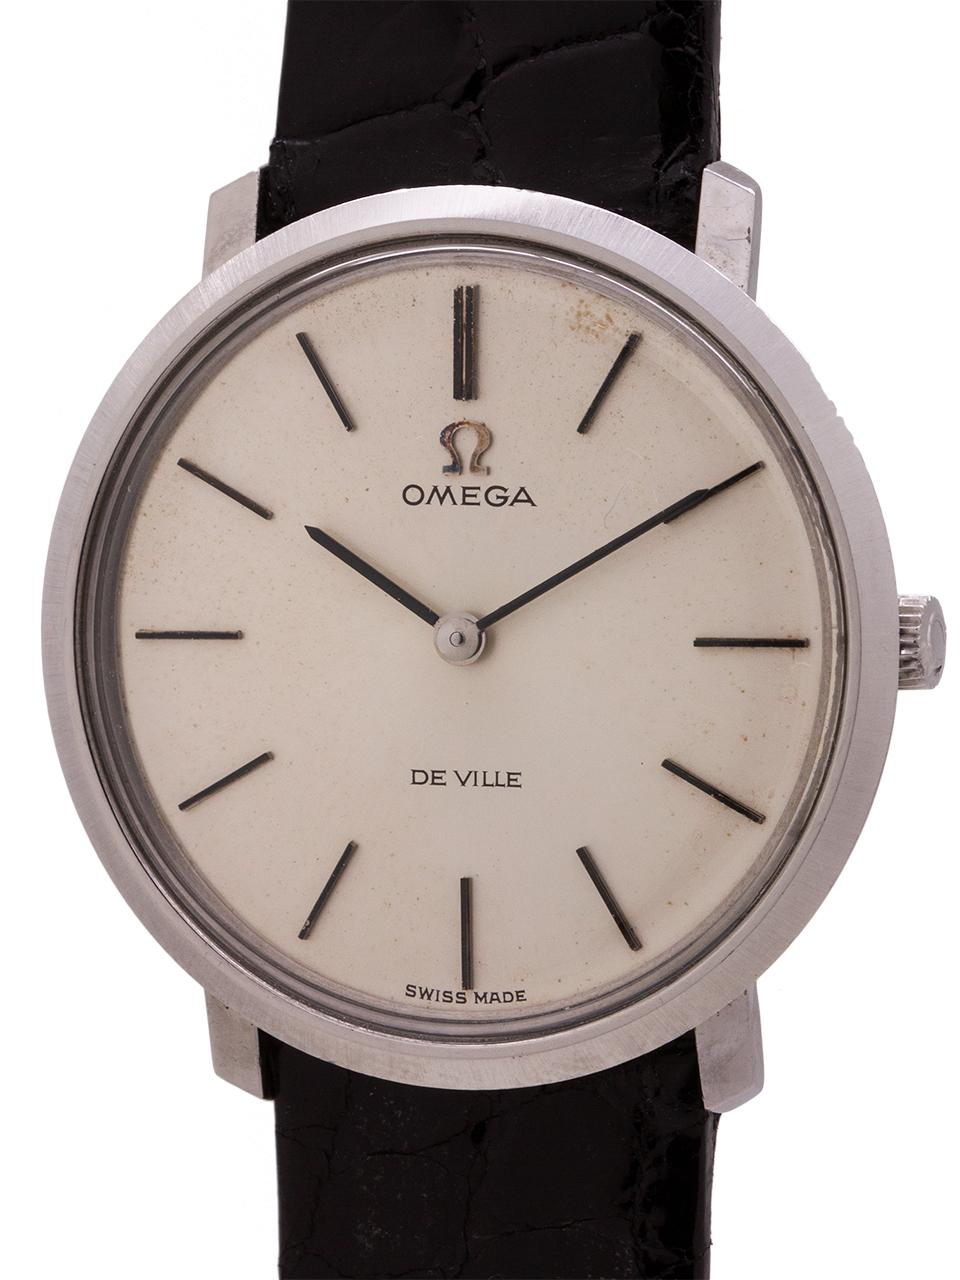 
Classic mid century design vintage man’s Omega stainless steel Deville ref # 111.077 circa 1970. Featuring a sleek and slim 33mm case with snap case back, acrylic crystal, and original matte silver dial with applied silver indexes and OMEGA logo,